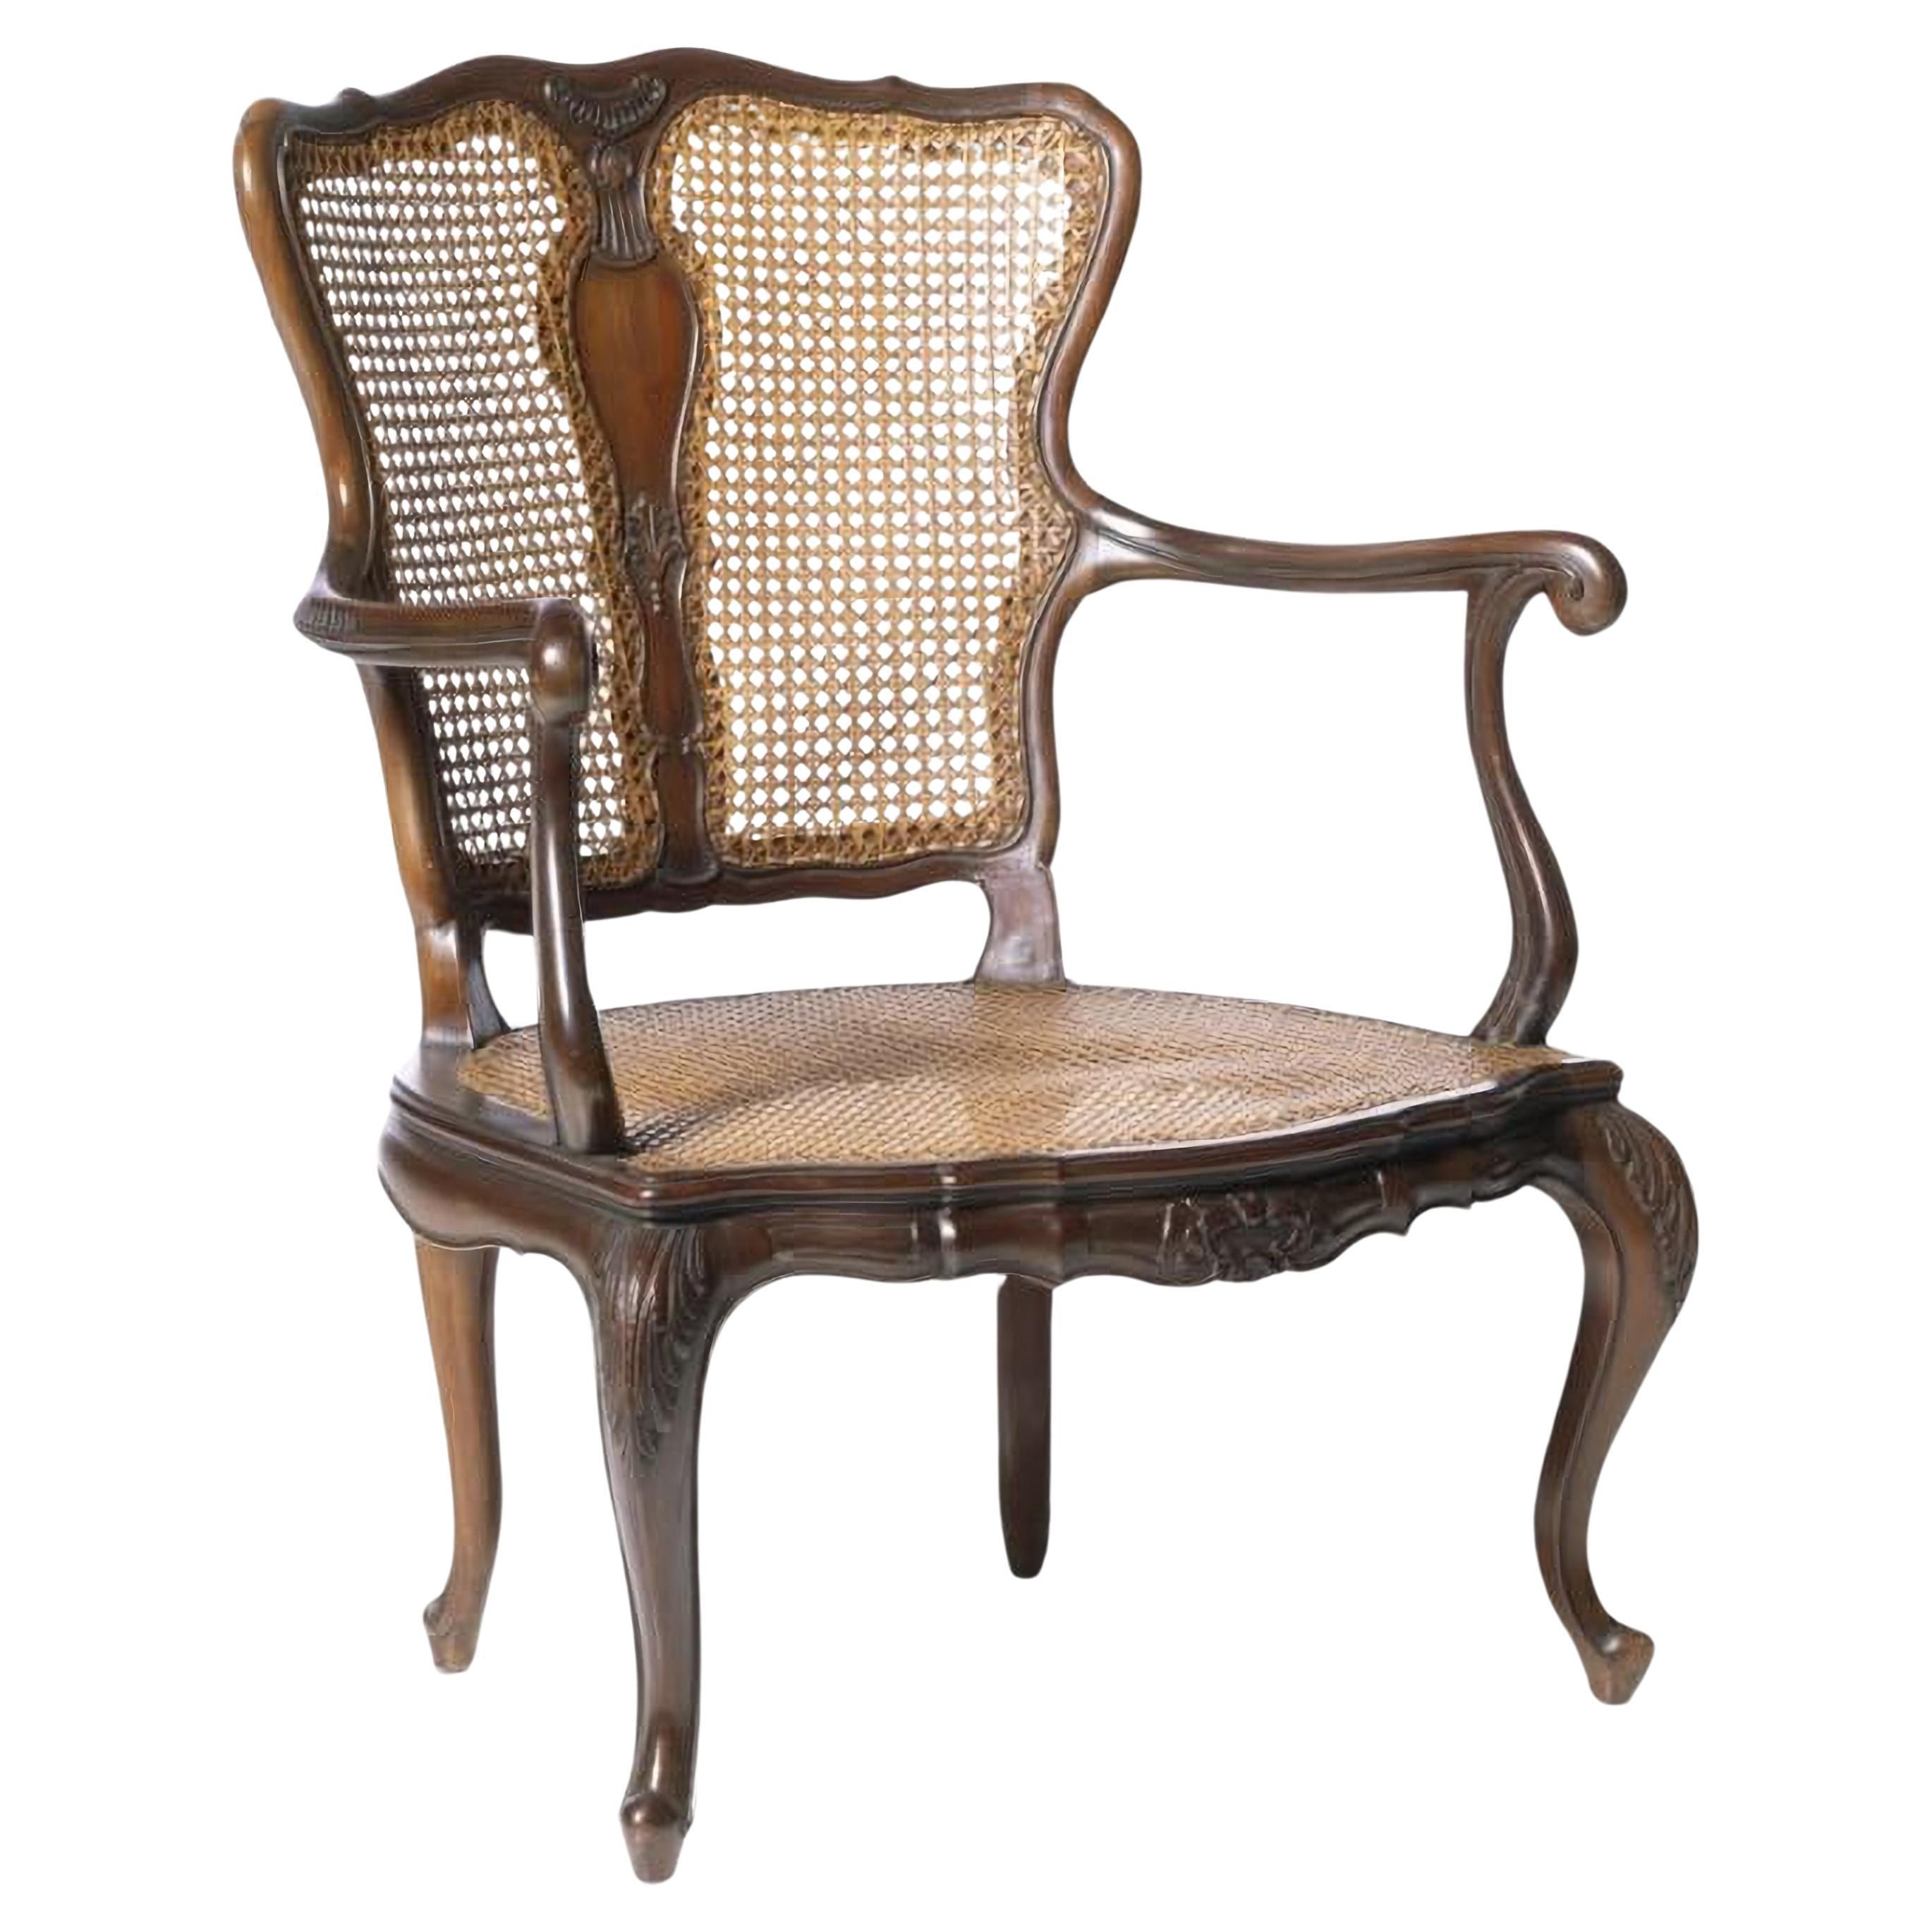 BEAUTIFUL PORTUGUESE ARMCHAIR from the 19th century For Sale